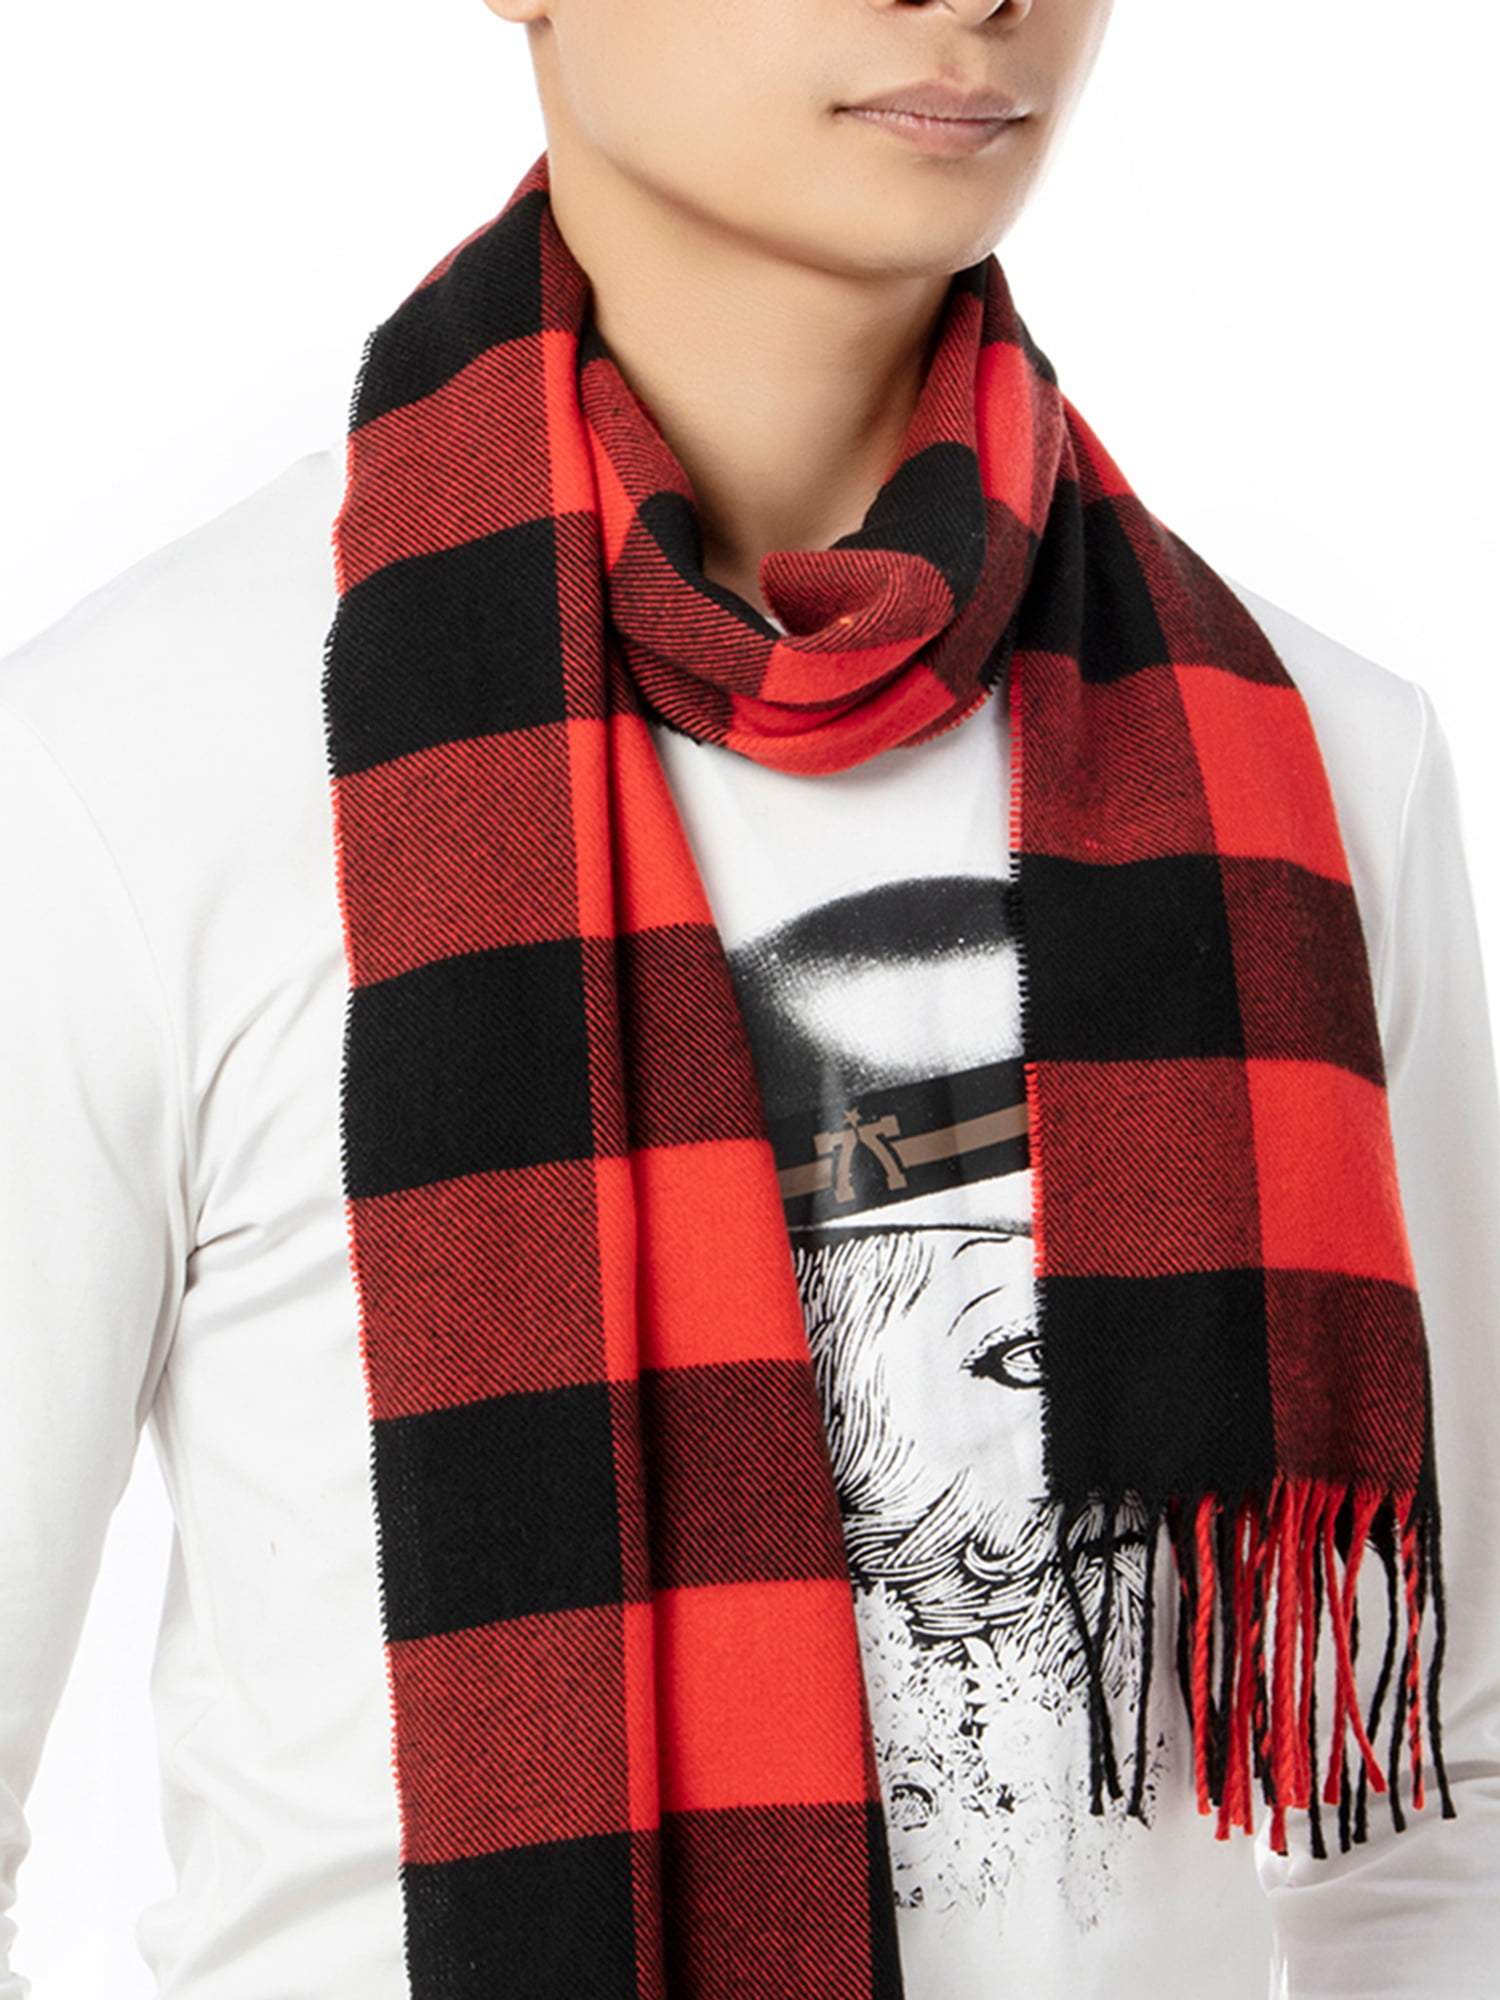 XICLASS Mens Winter Cashmere Scarf Fashion Formal Soft Scarves for Men 